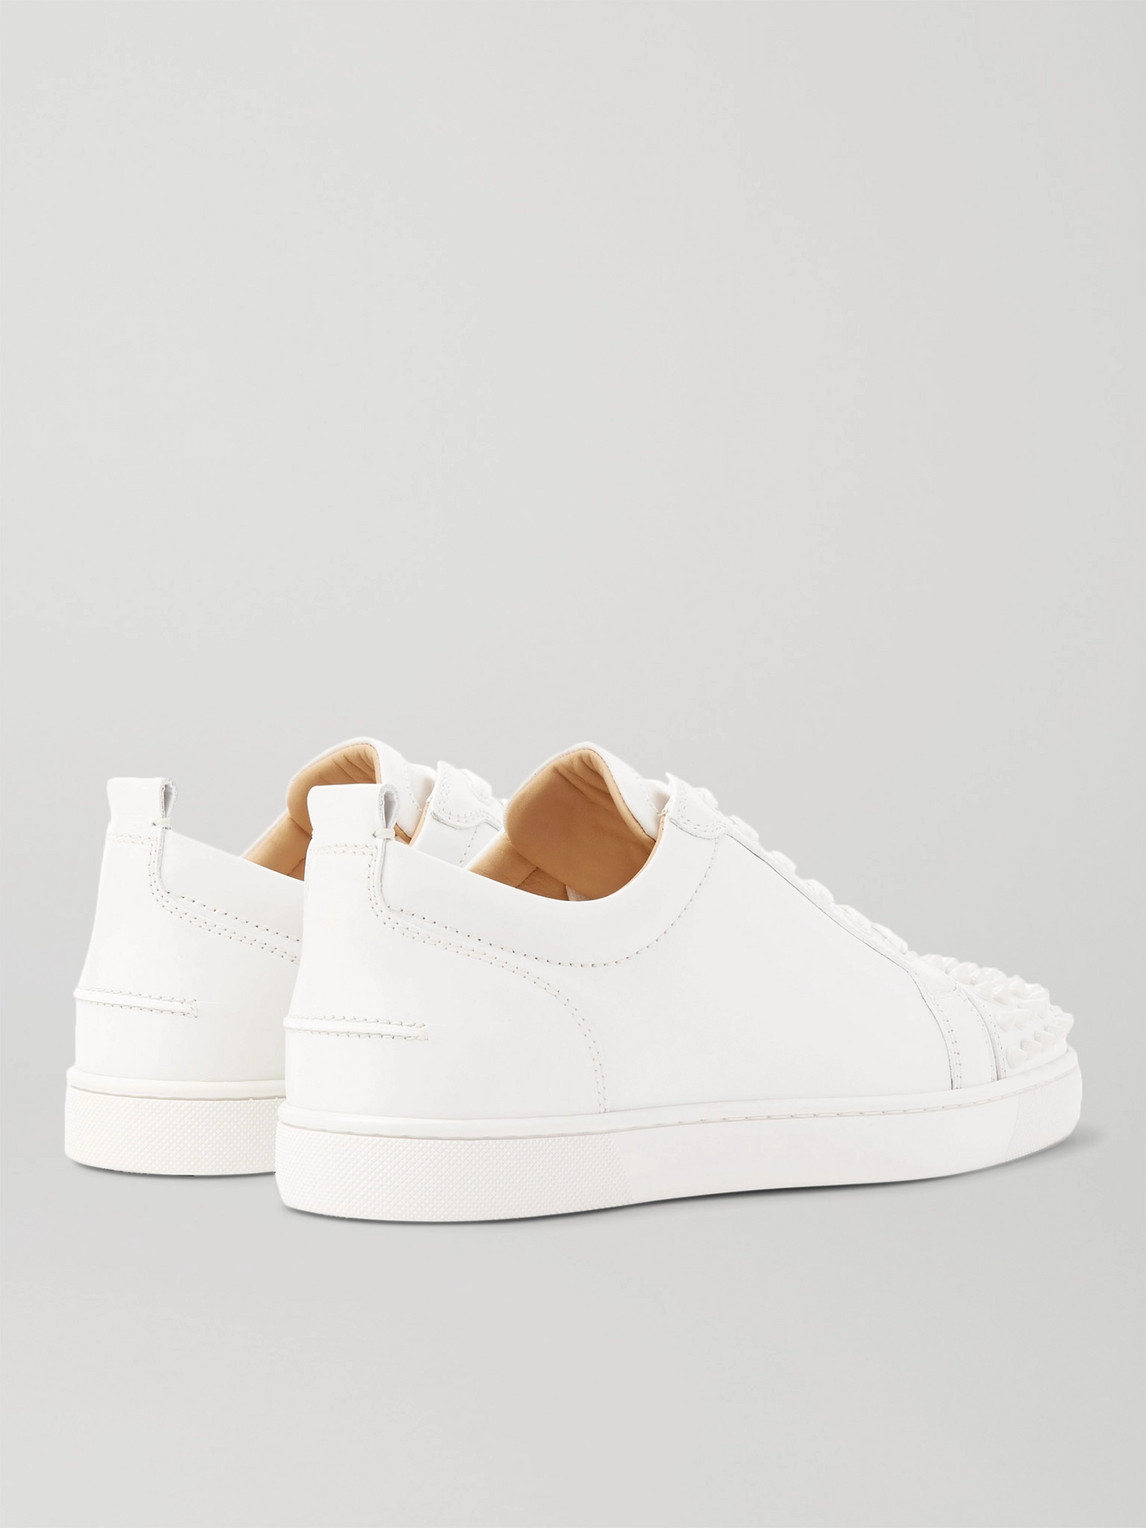 Shop Christian Louboutin Louis Junior Spikes Cap-toe Leather Sneakers In White